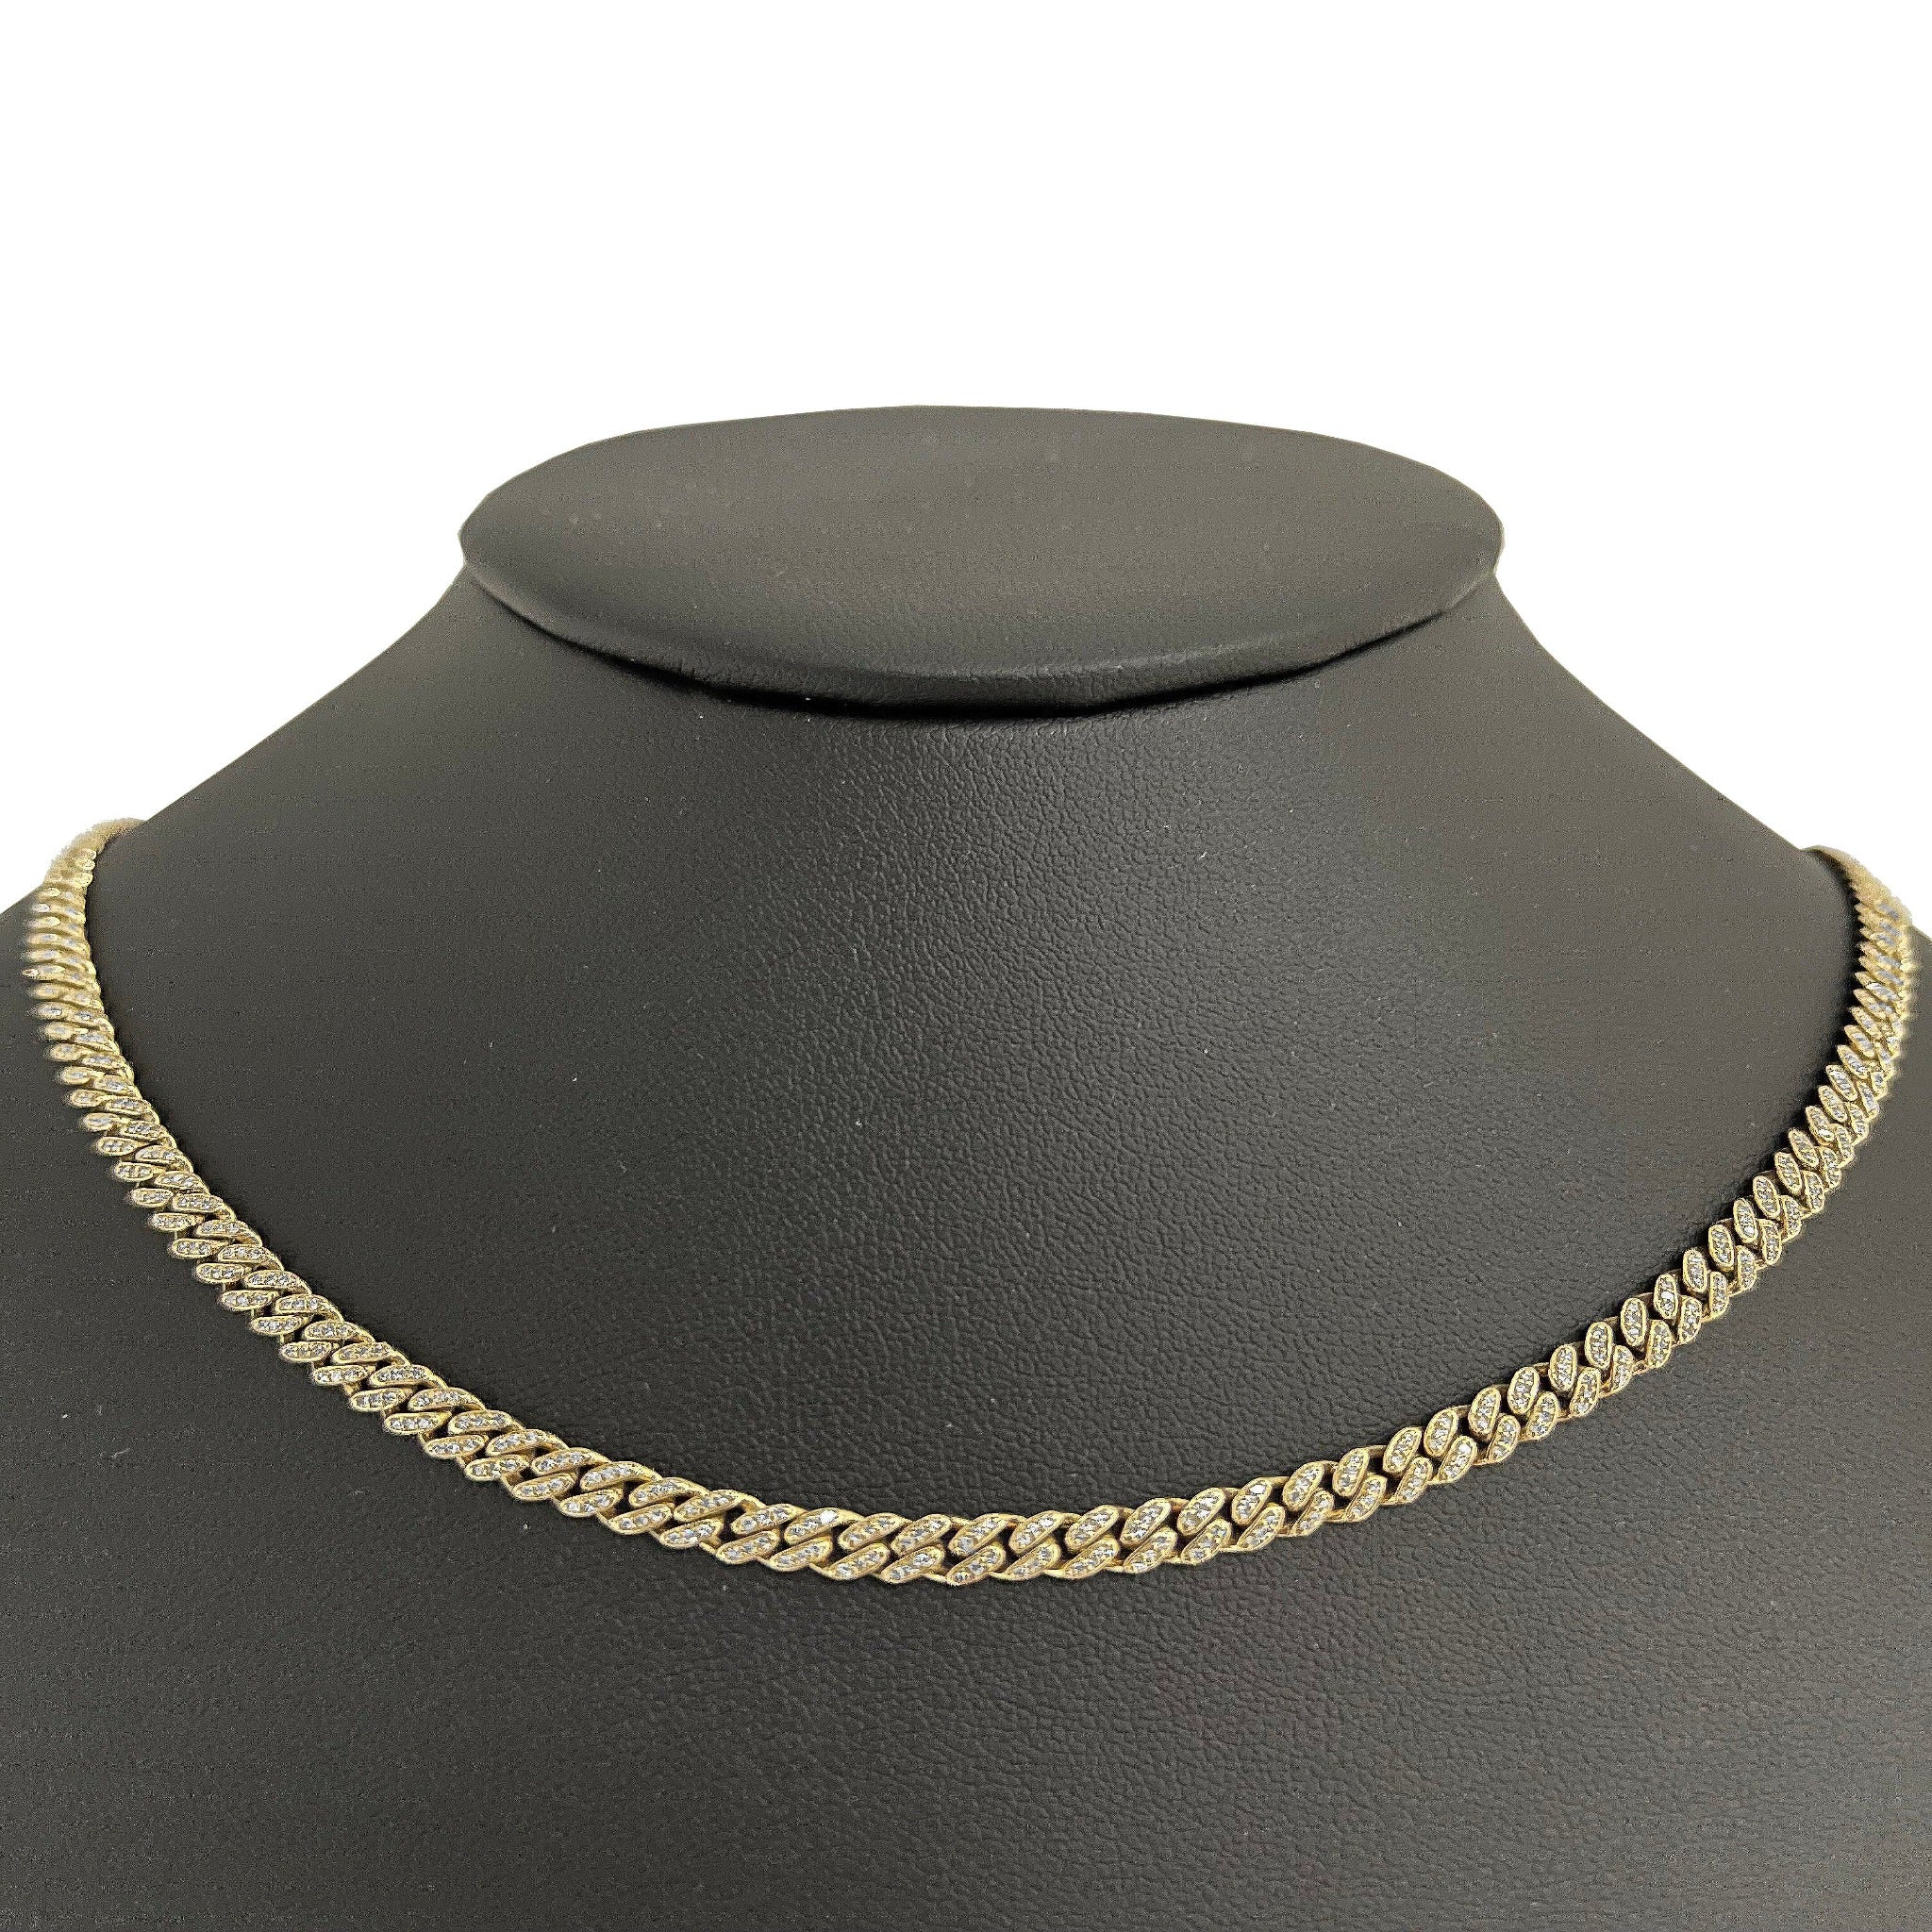 ''SPECIAL! 4mm 1.75ct 14k Yellow Gold DIAMOND Round Cuban Necklace 18''''''